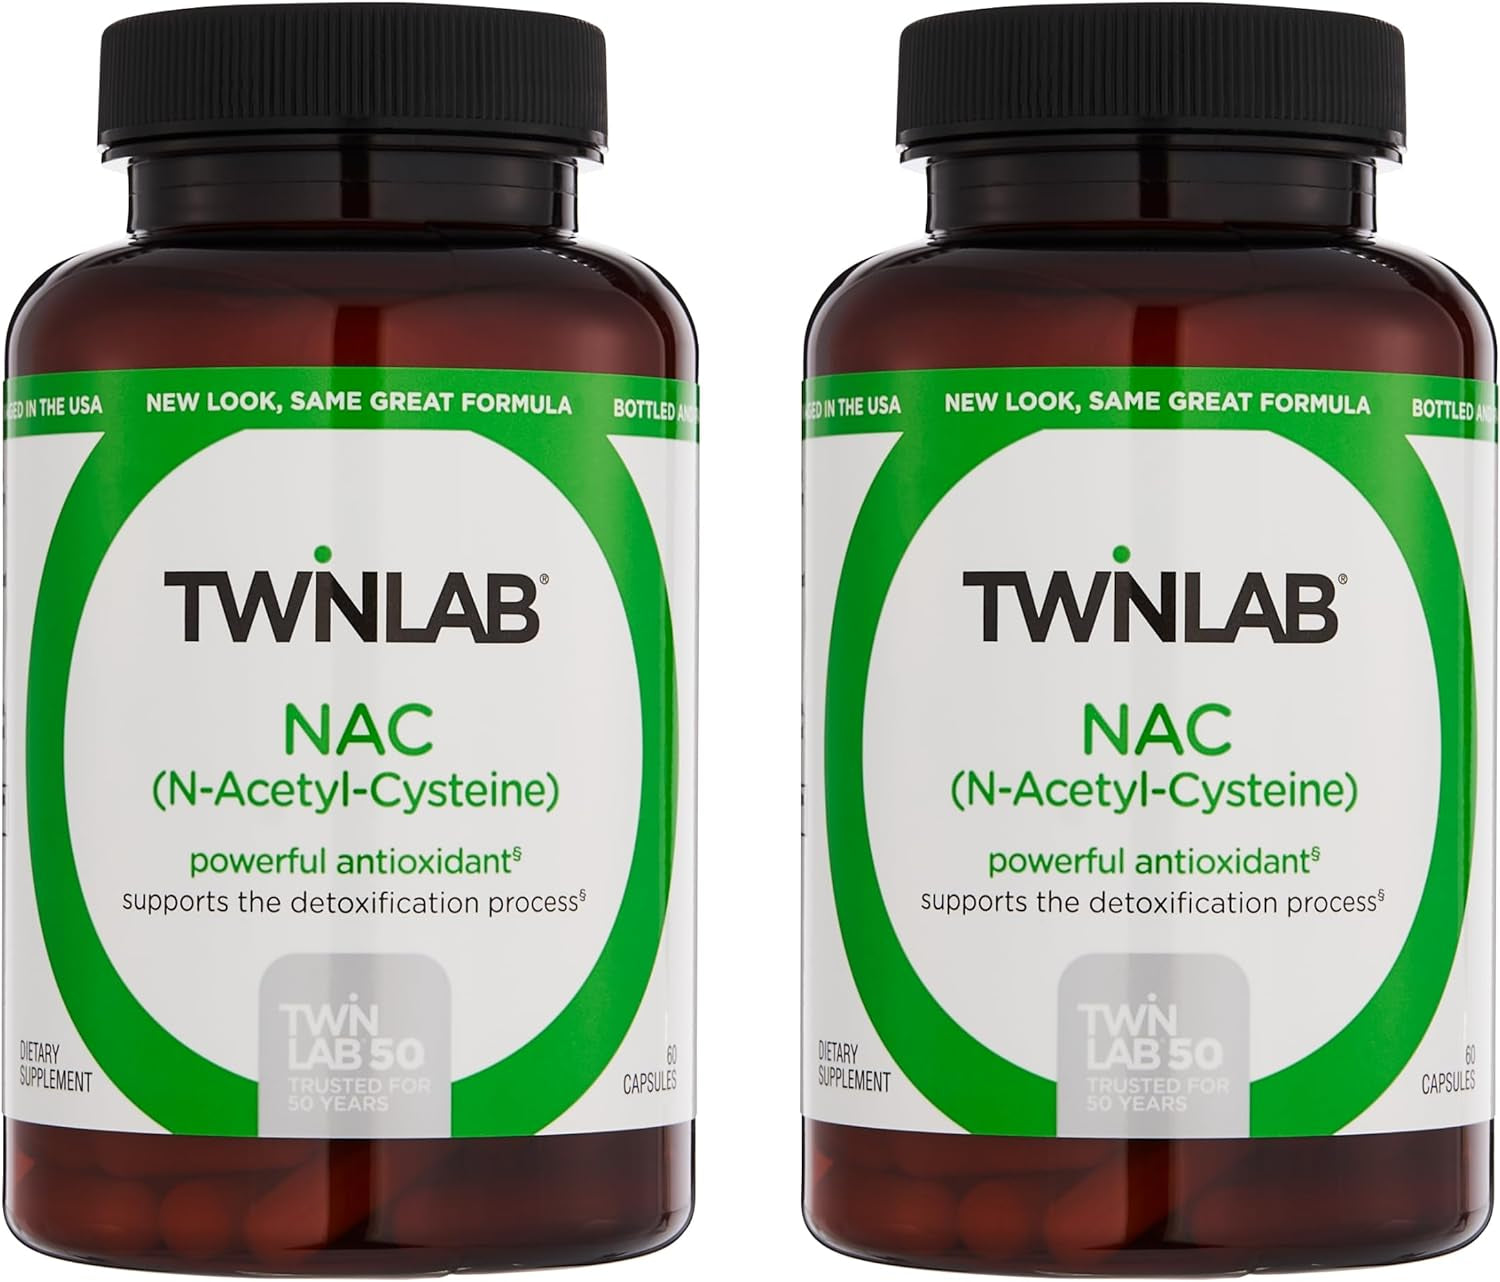 Twinlab N-Acetyl-Cysteine (Nac) - Antioxidant Supplements for Men and Women - 600 Mg, 60 Capsules (Pack of 2)